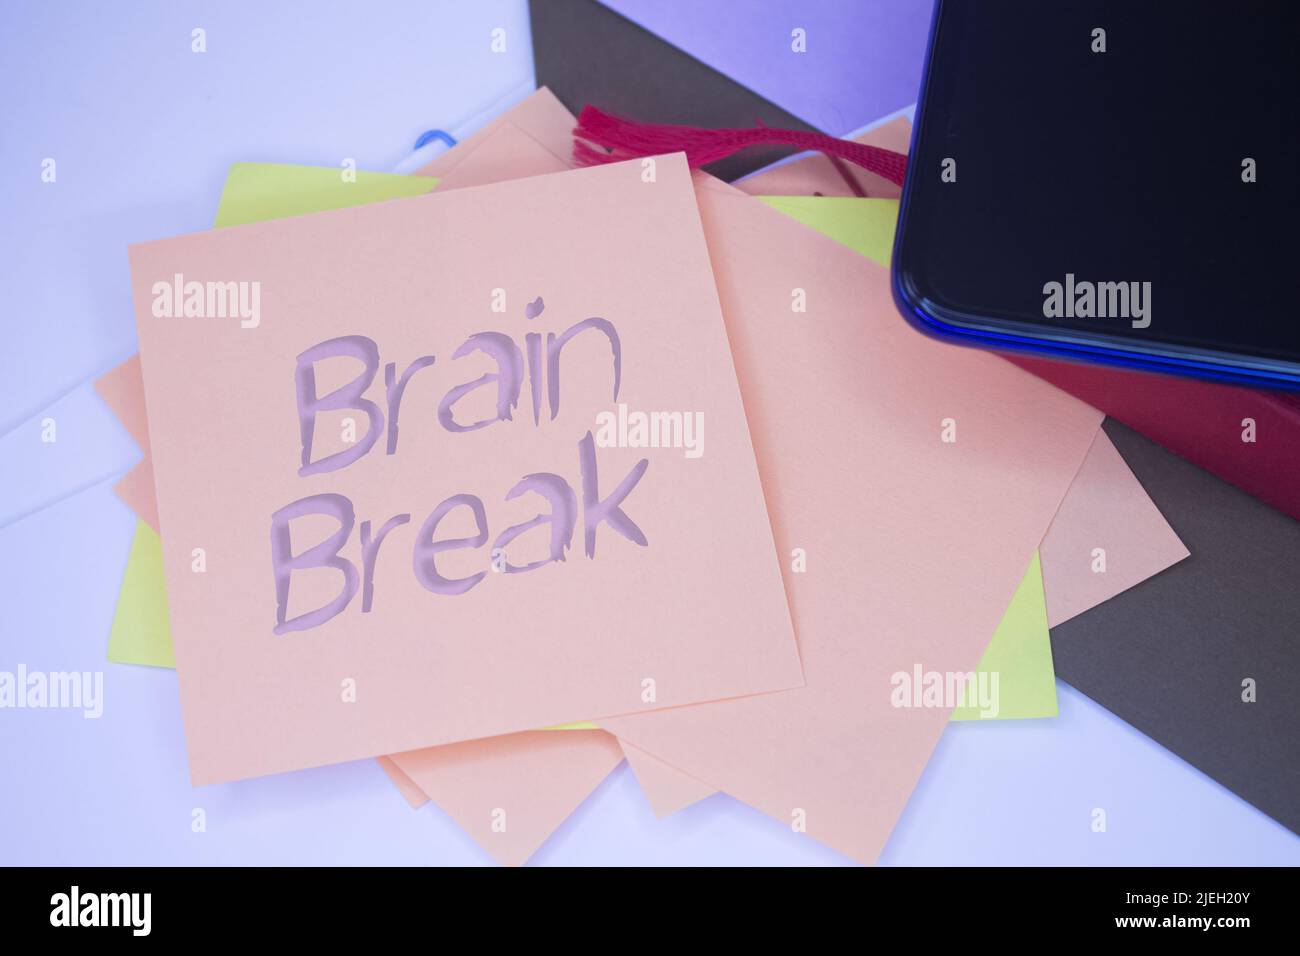 Brain Break. Text on adhesive note paper. Event, celebration reminder message. Stock Photo